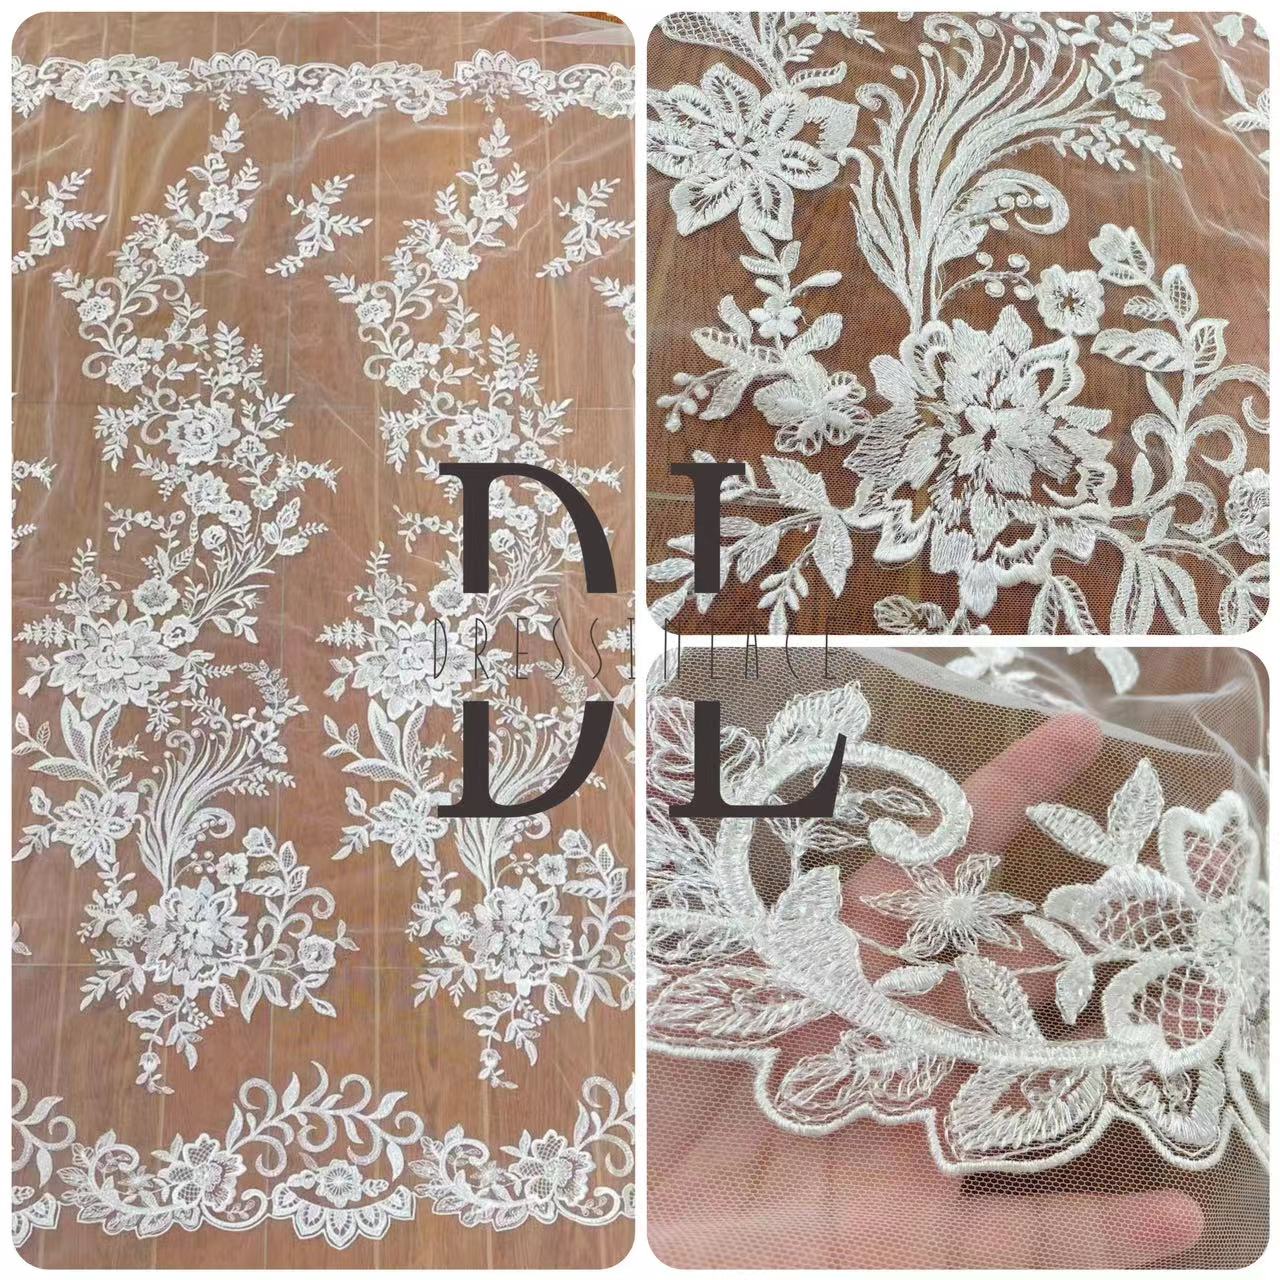 DL130001 Professional Embroidery Lace Fabric for Wedding Dresses – Shimmering and Transparent with Soft, Skin-Friendly Texture DL130001